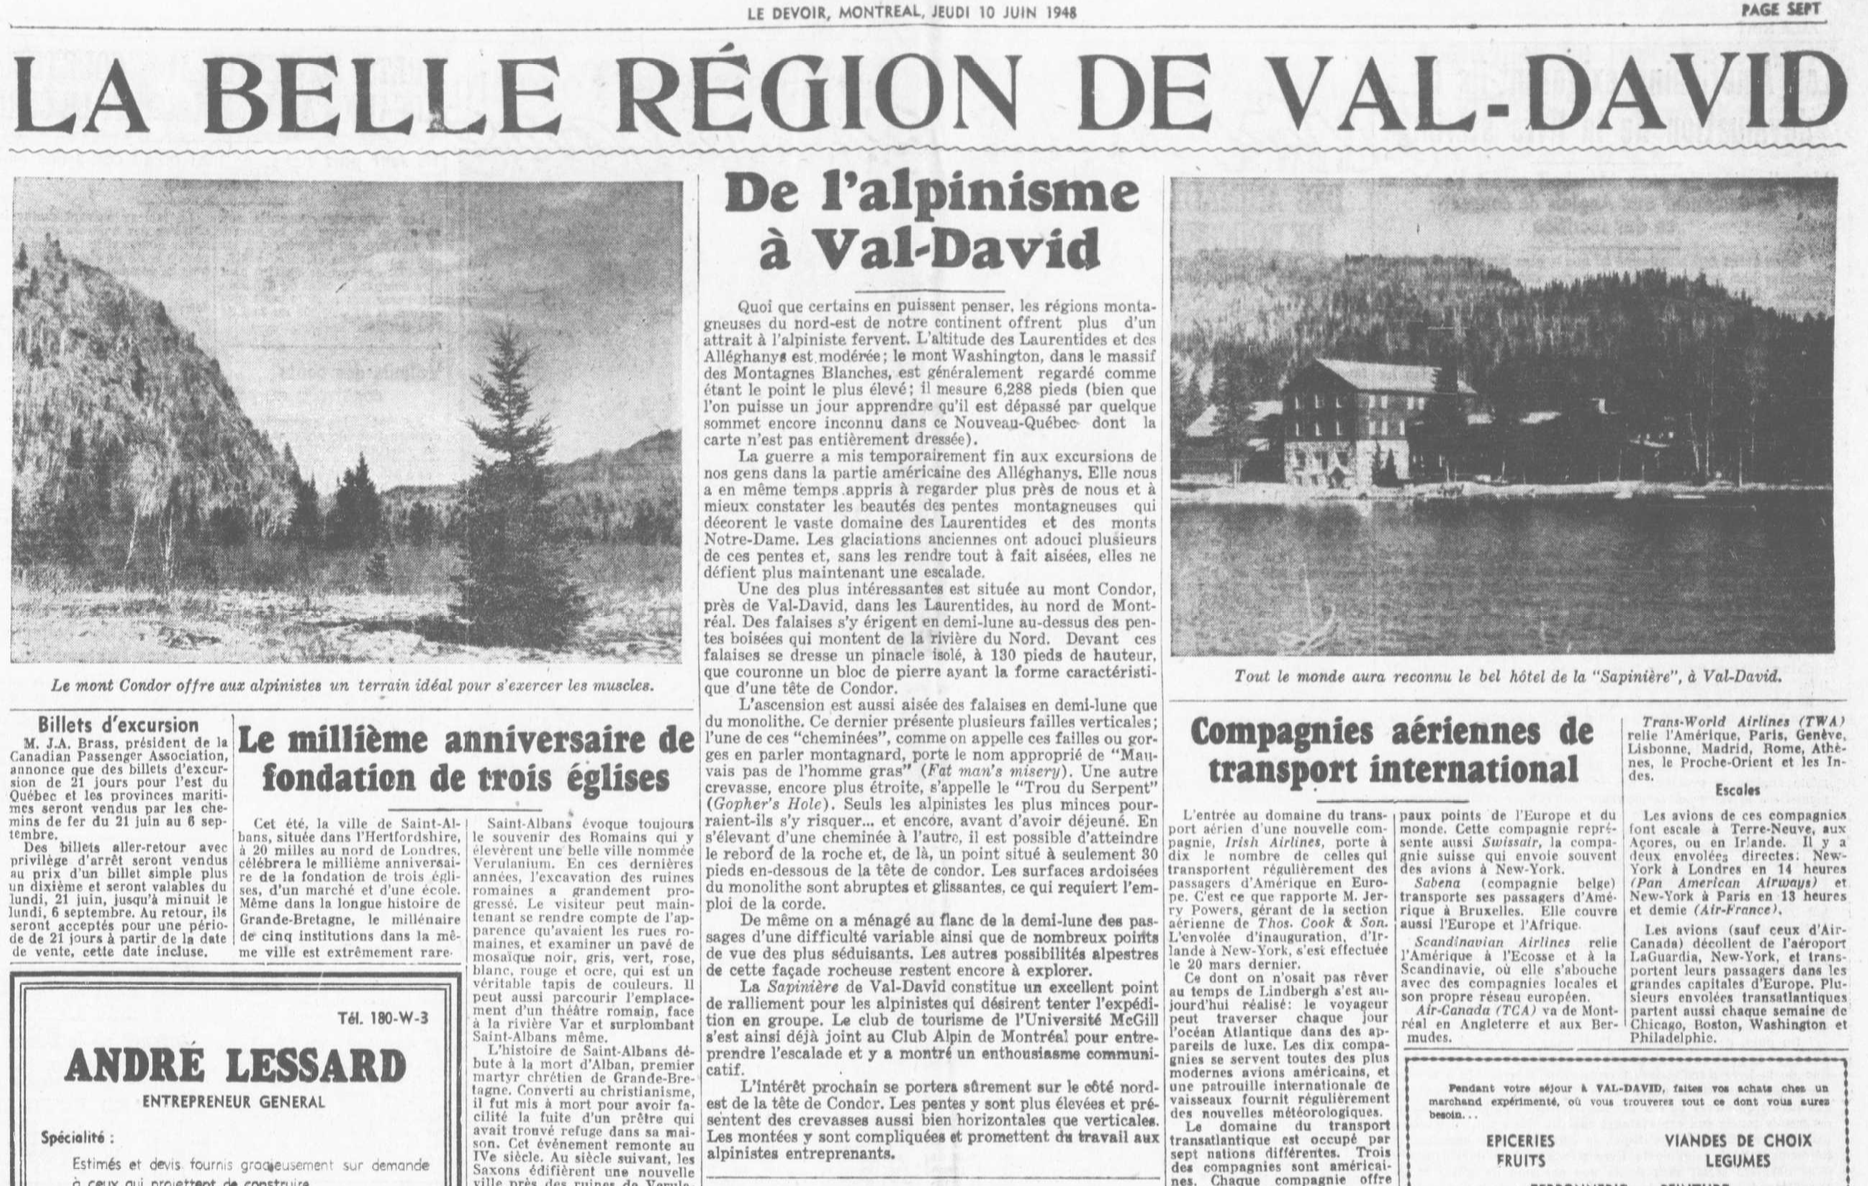 Extract from Le Devoir newspaper in 1947, referring to the tourist industry in Val-David and illustrated with two landscapes.